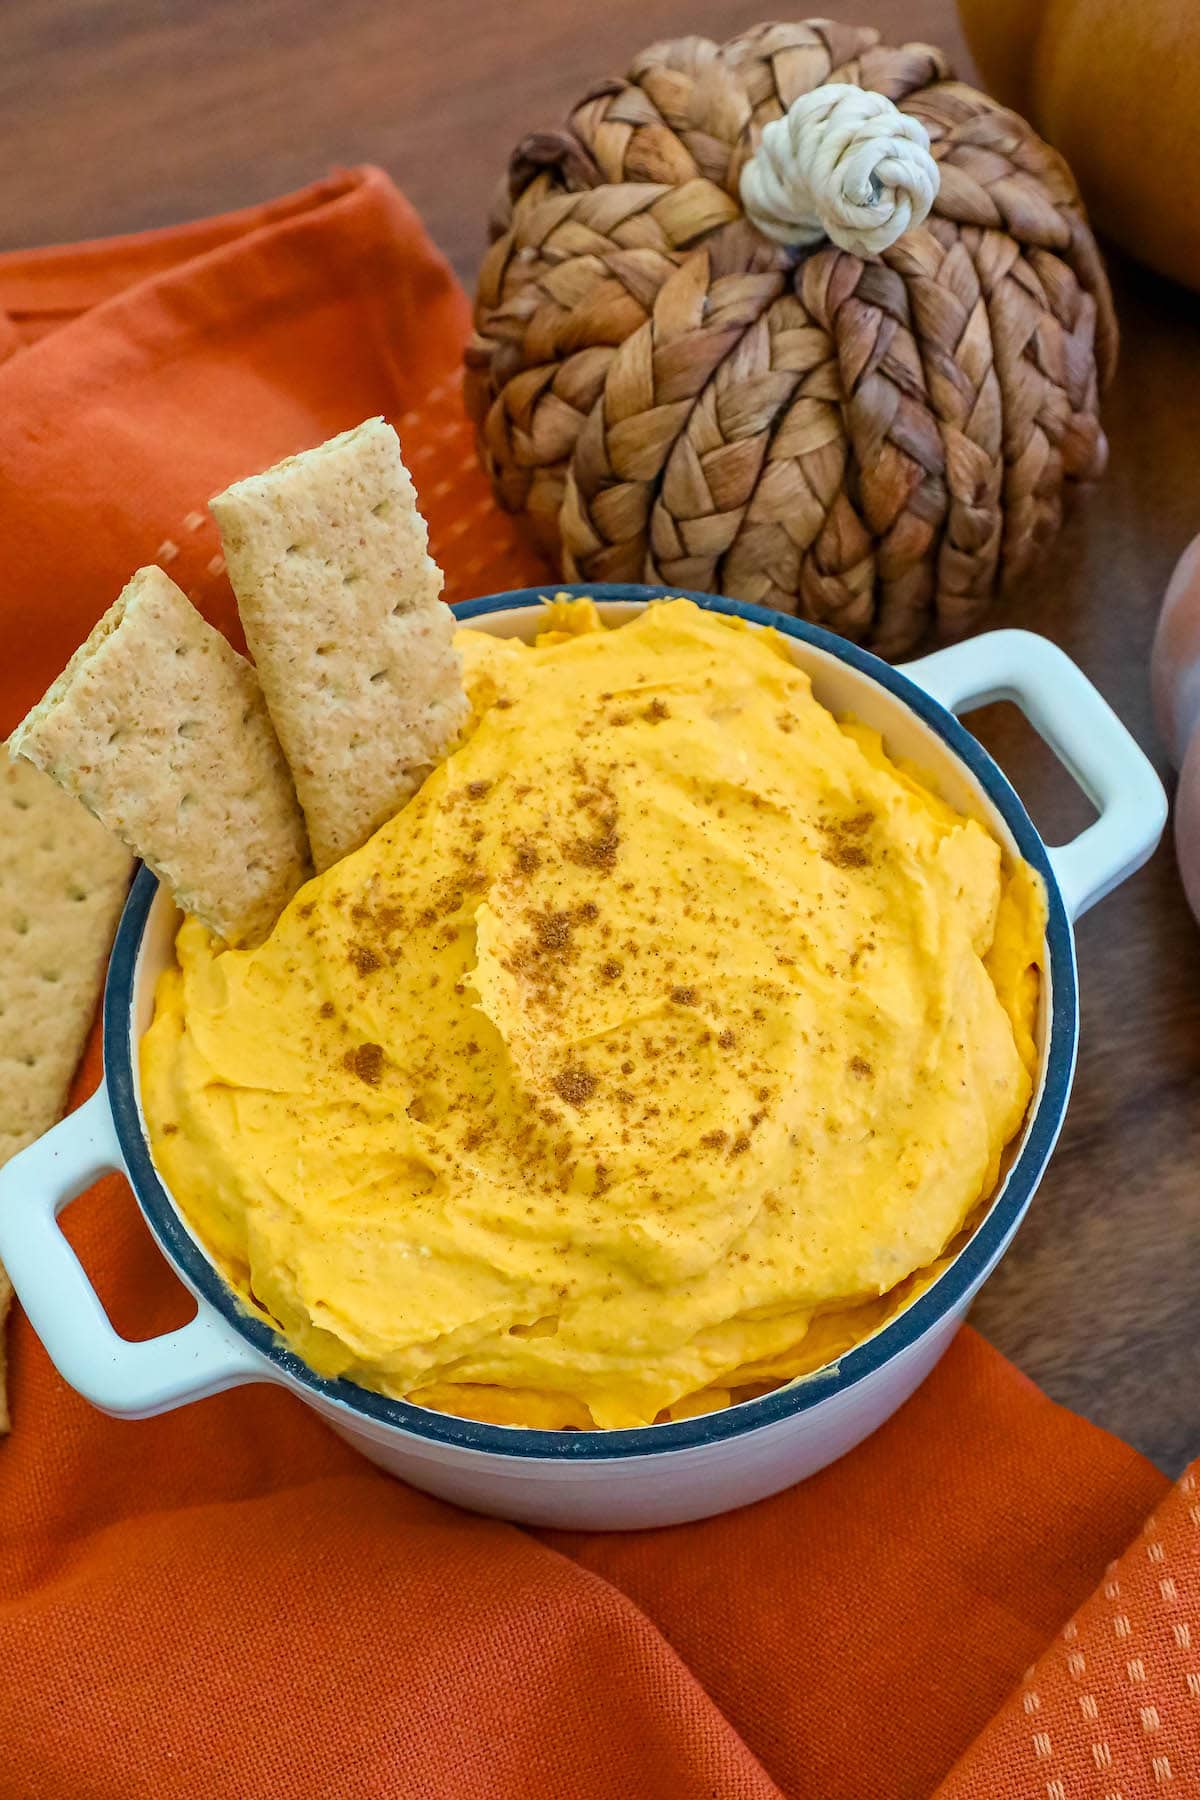 A bowl of pumpkin fluff dip accompanied by crackers on a napkin.